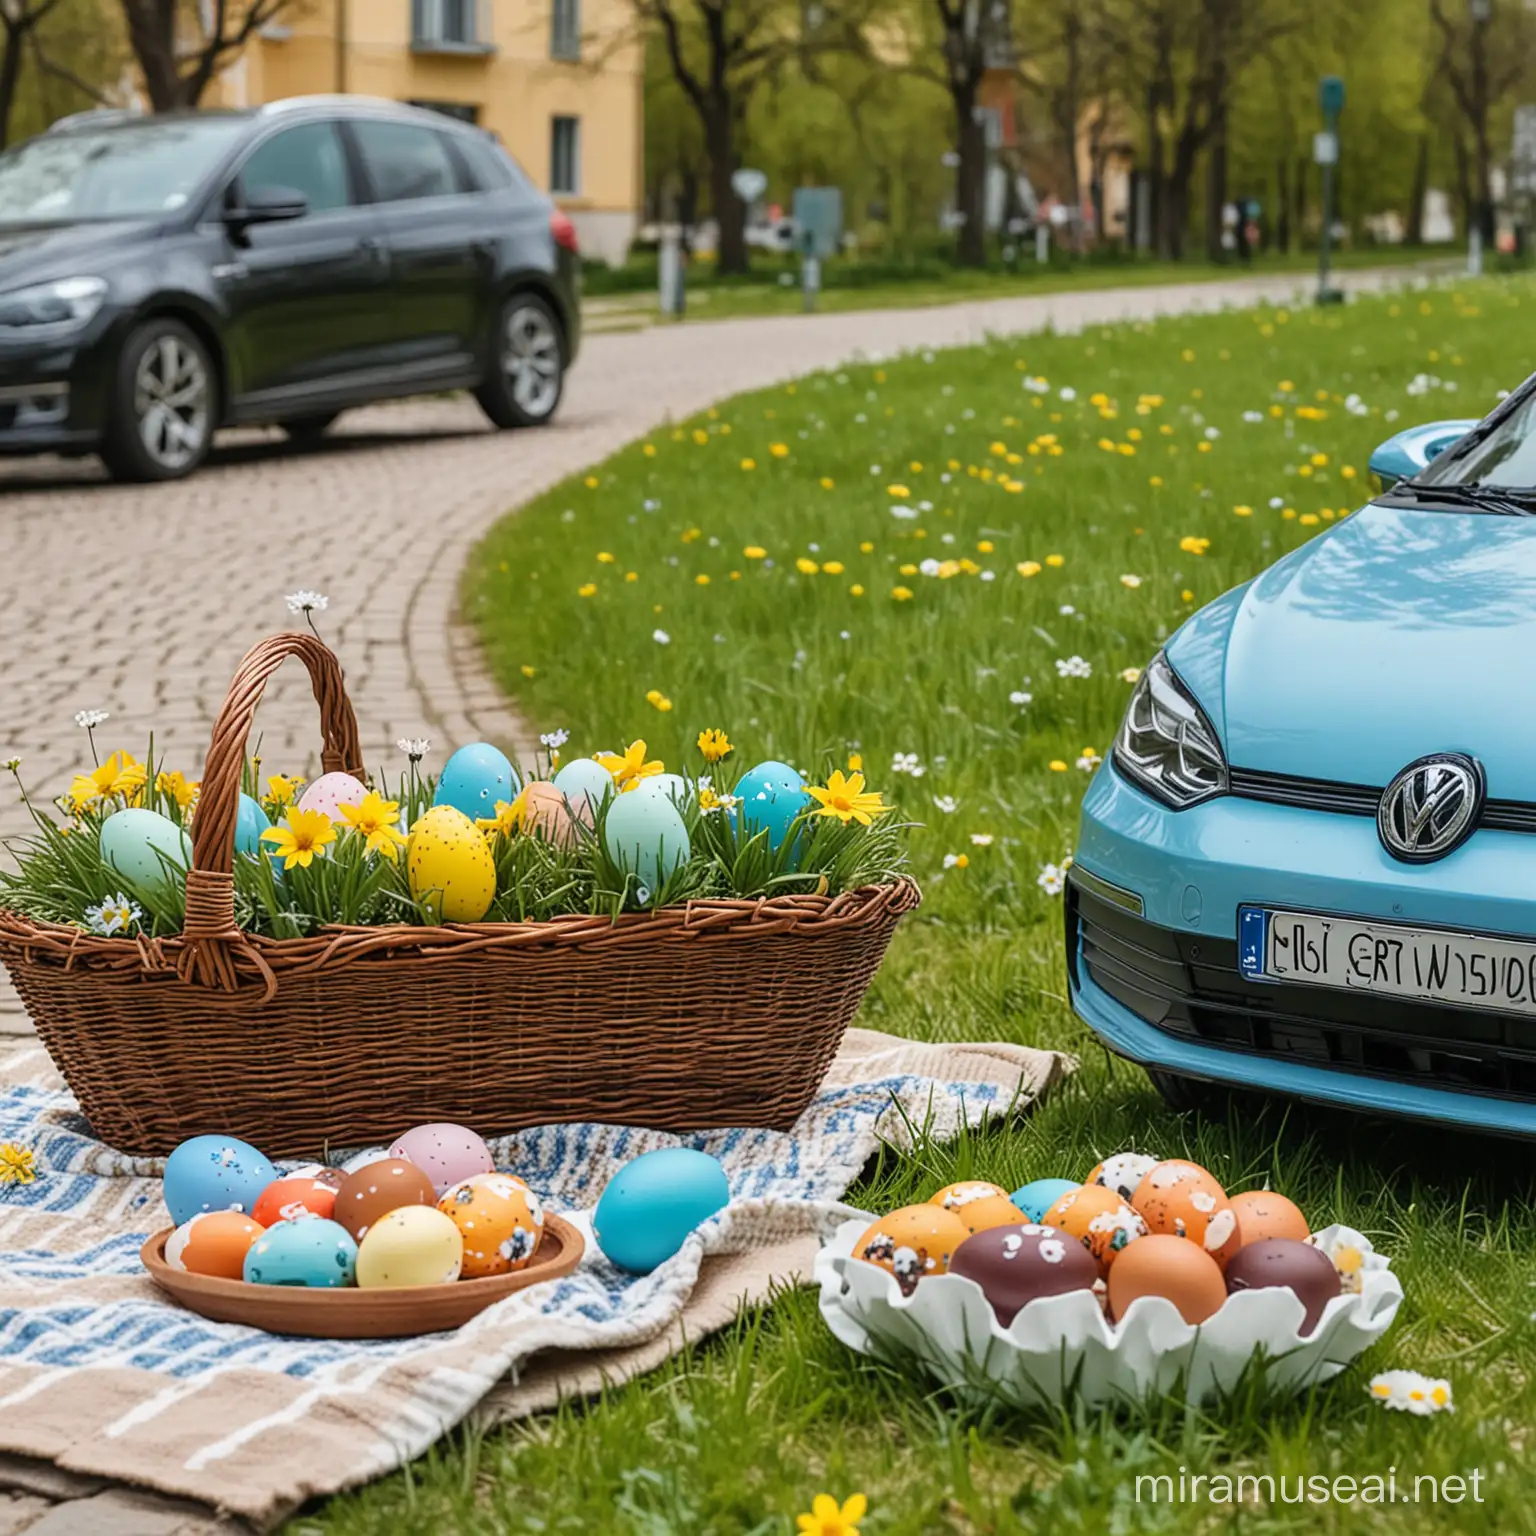 Lithuanian Spring Celebration Easter Traditions and Sustainable Transport